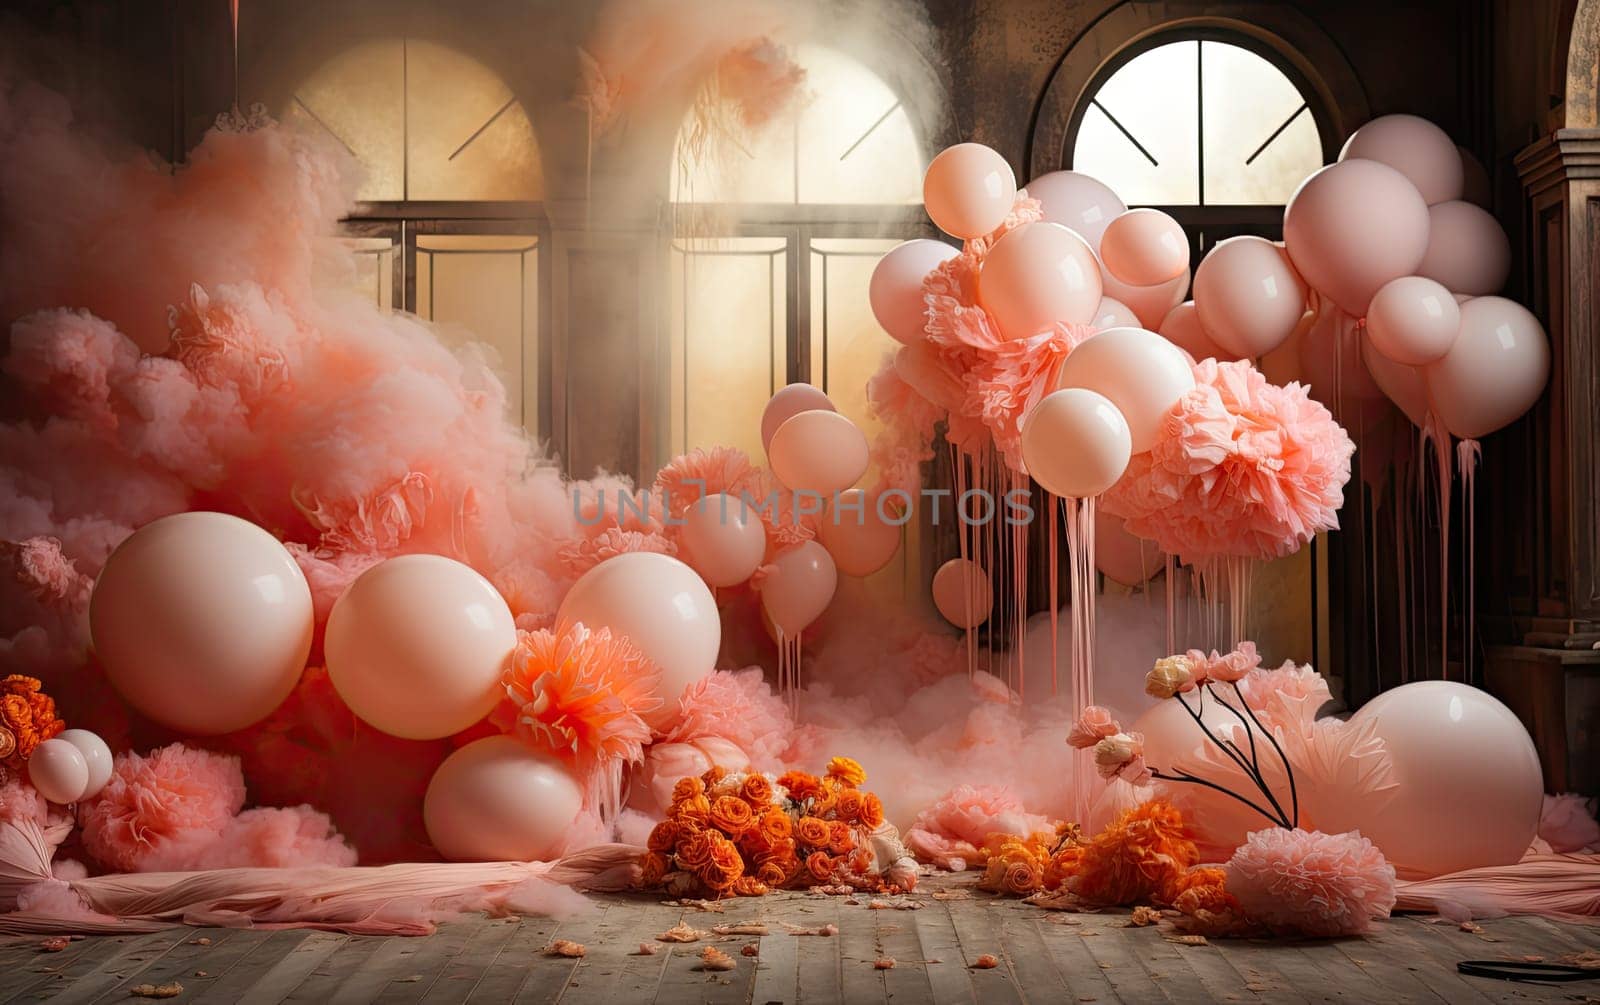 Maternity backMaternity background or elegant wedding backdrop Mansion hall ballroom interior with pink flower decorations and balloons.ground or elegant wedding backdrop Mansion hall ballroom interior with pink flower decorations and balloons